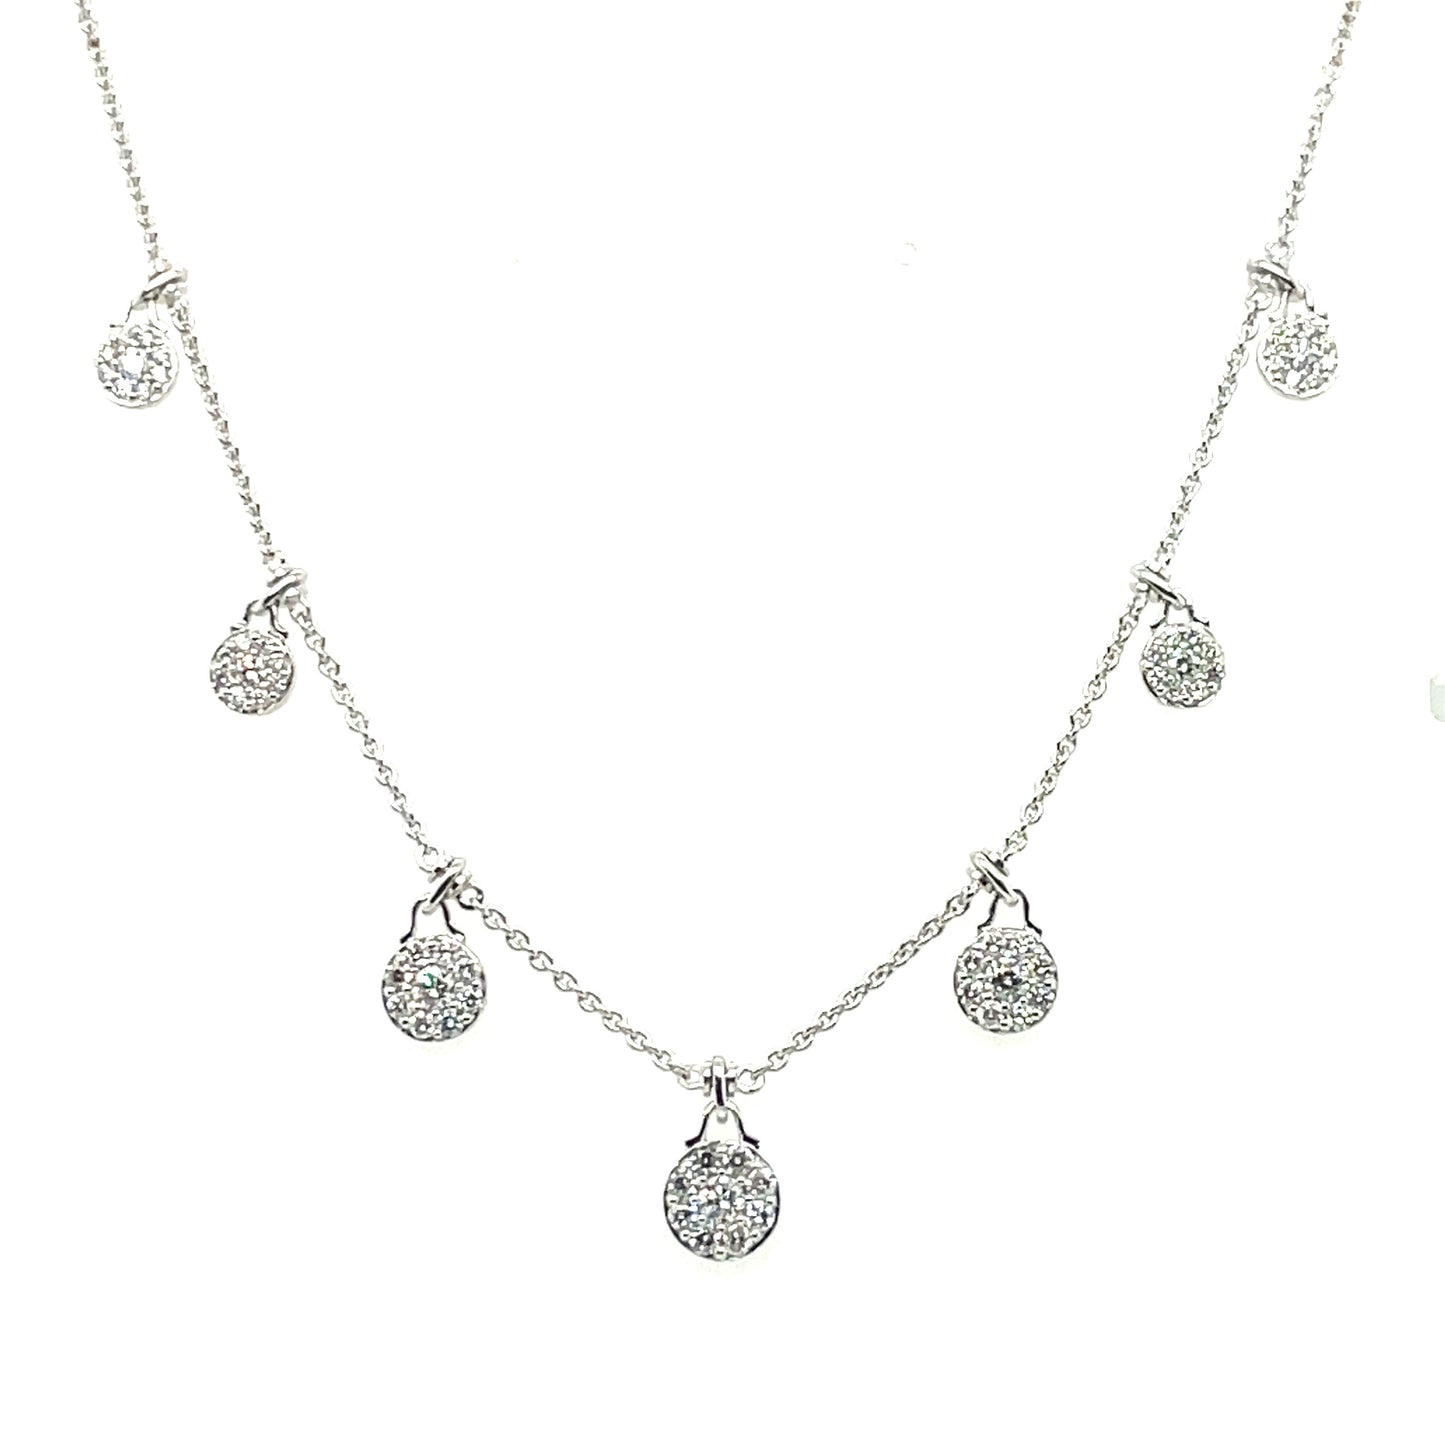 White Gold Necklace with Seven Pave Set Stations